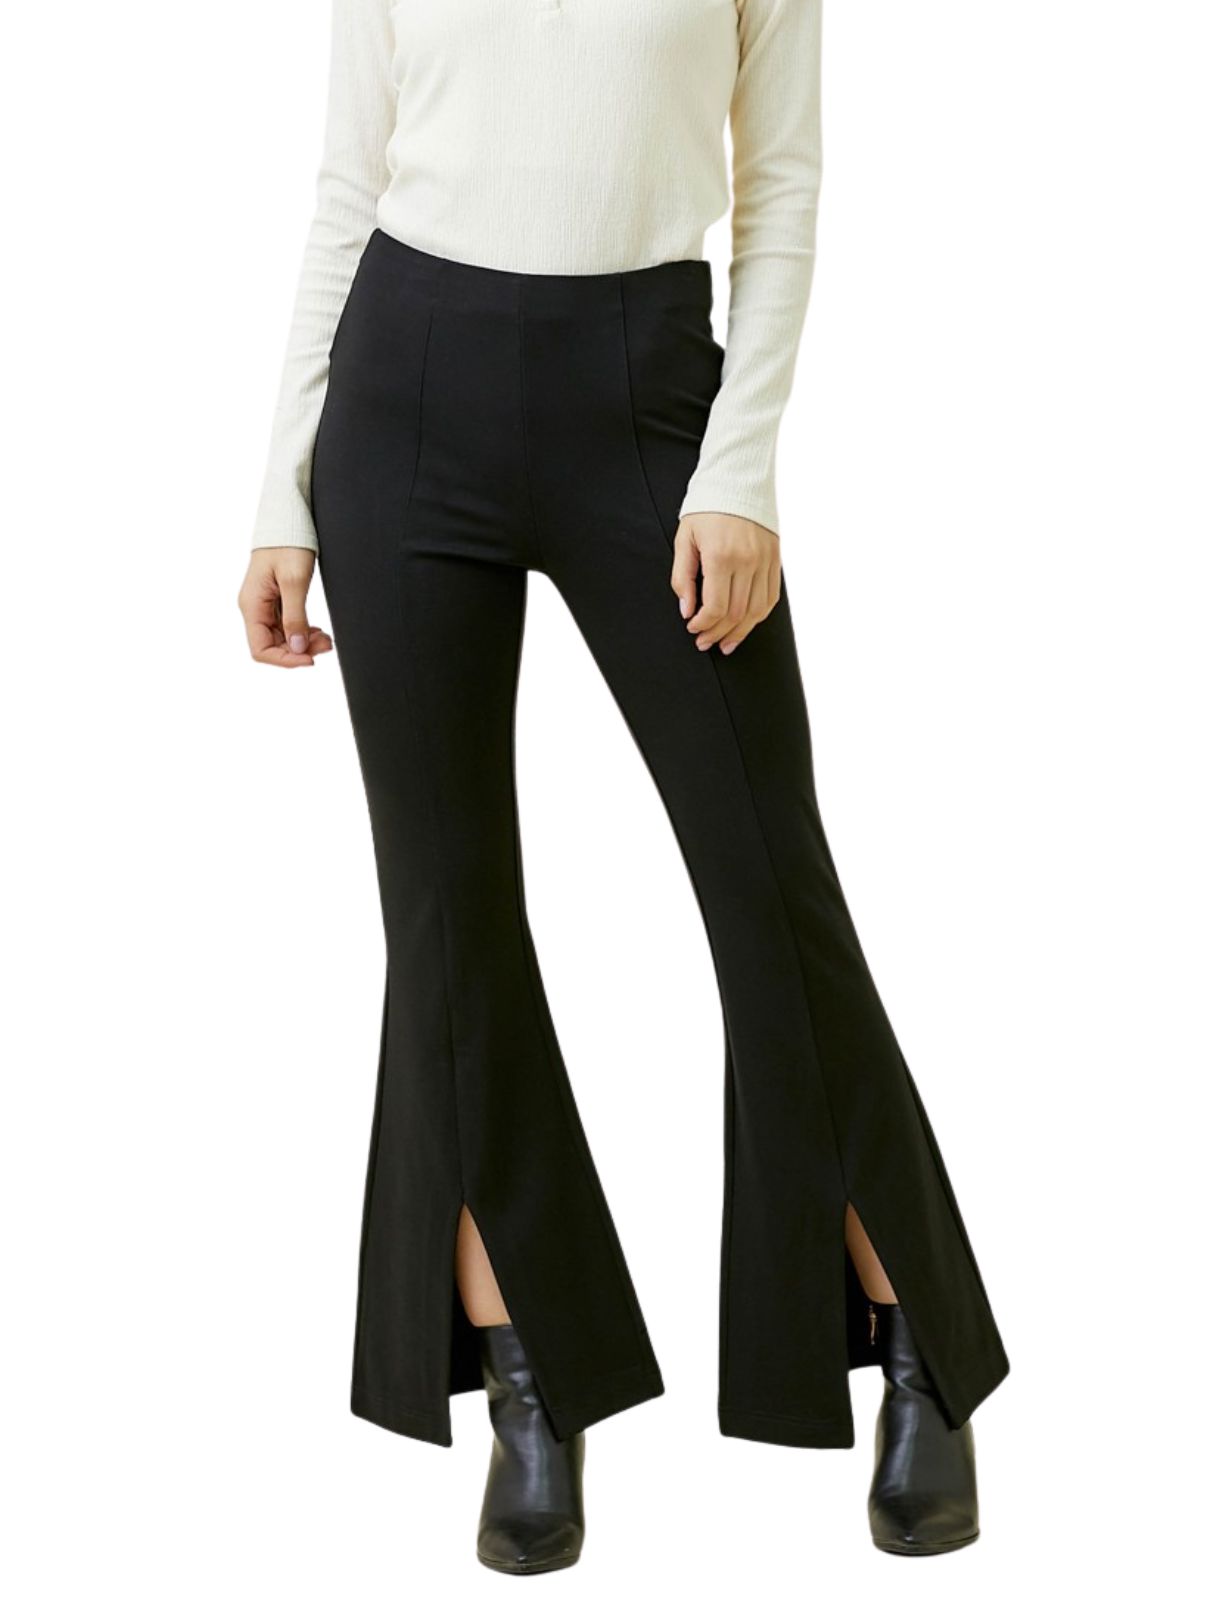 Cotton Flare Pants with Skirt for Women / Black